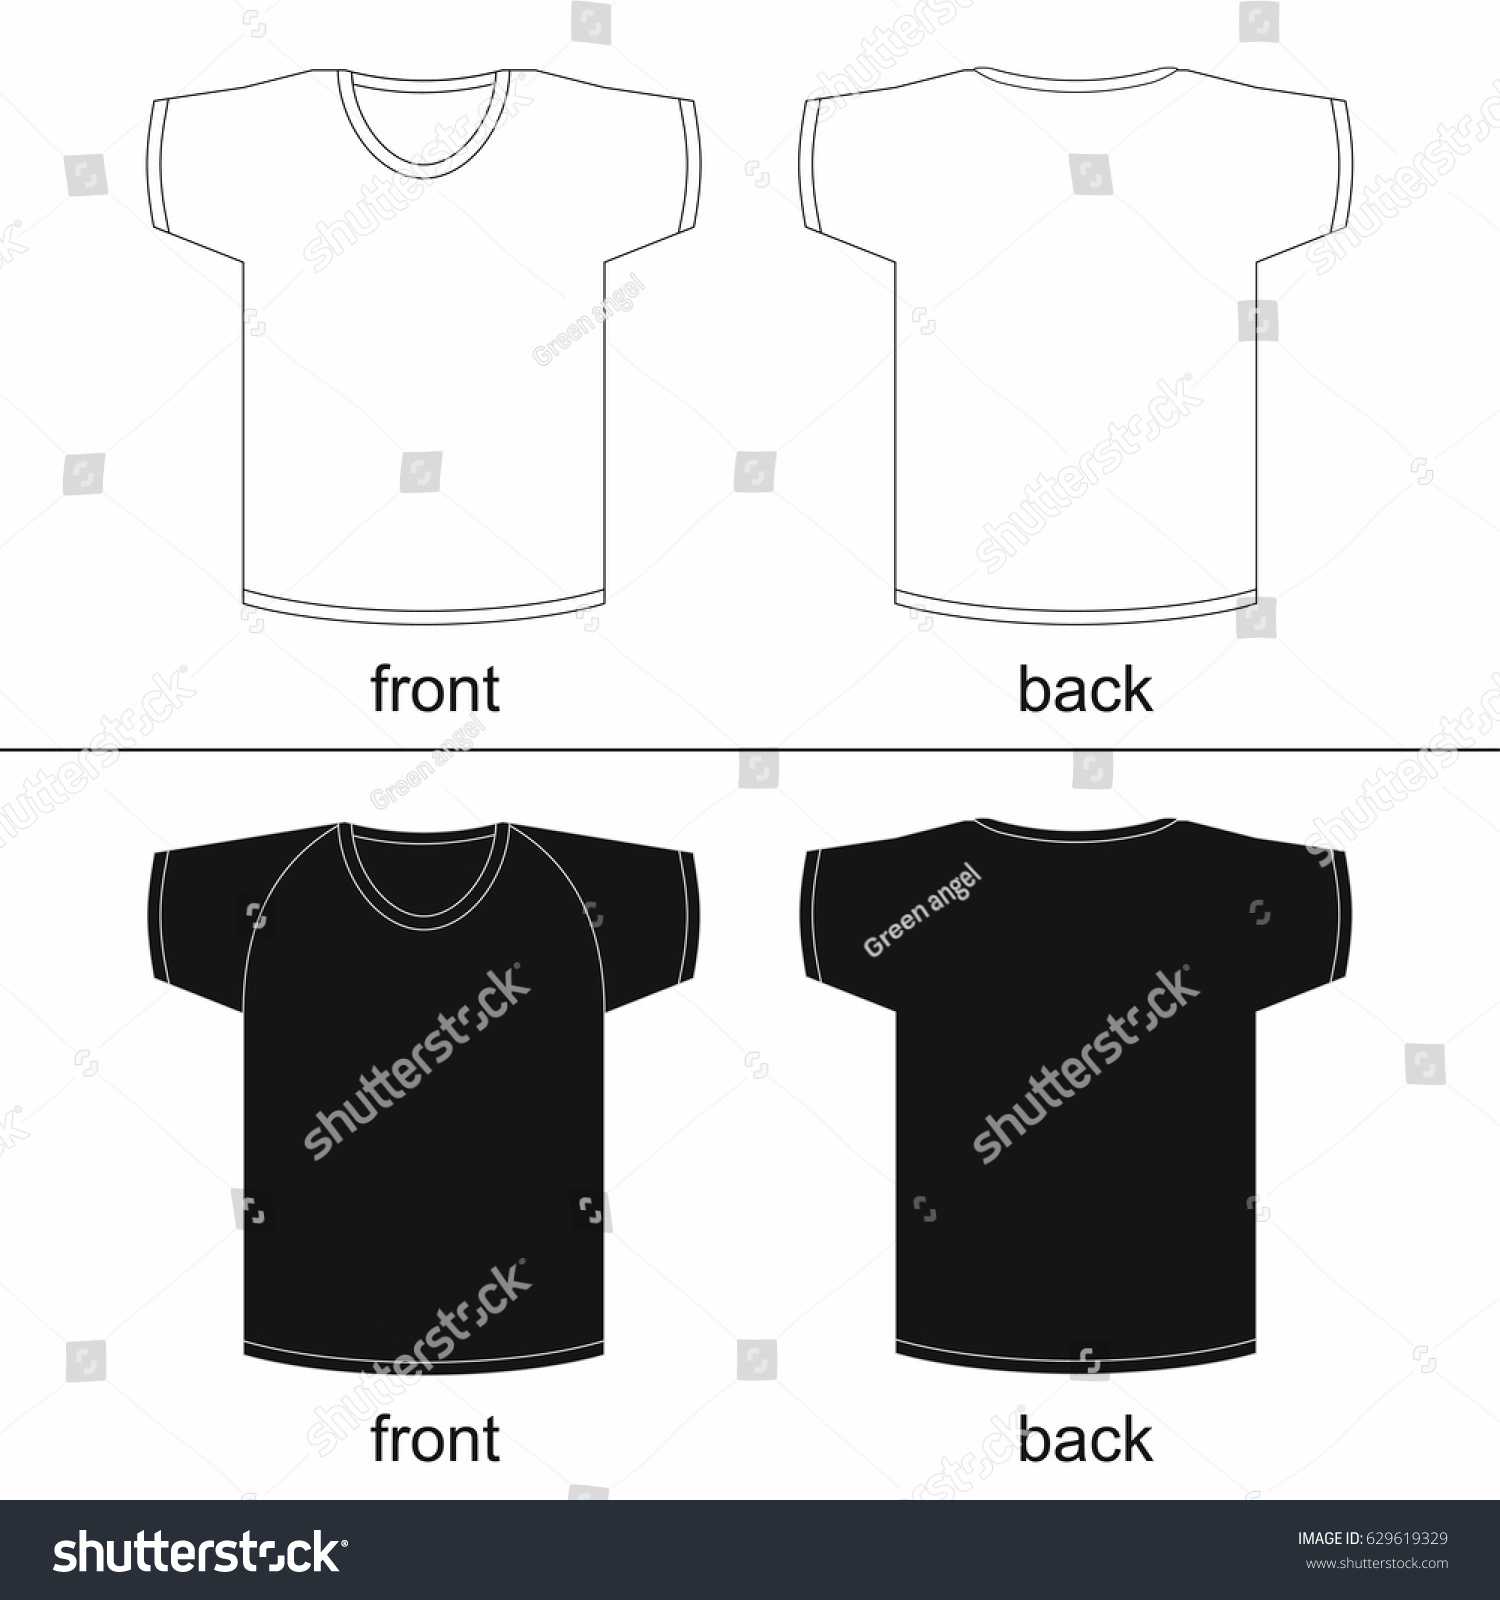 Blank Tshirt Template Front Back Printable Stock Image Inside Blank Tshirt Template Printable